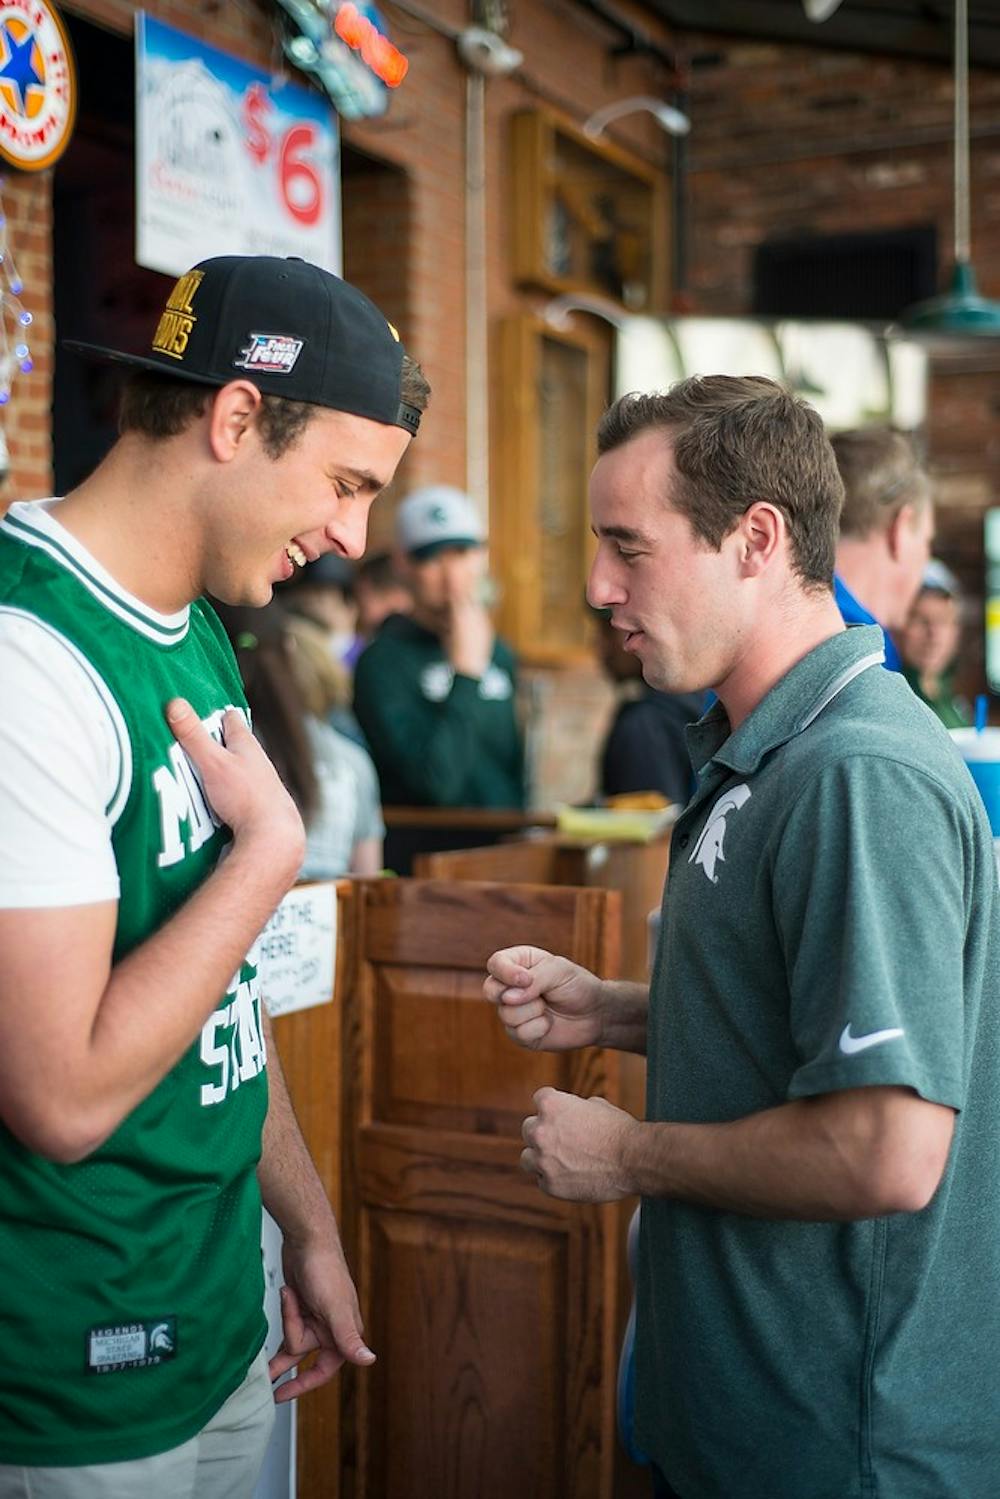 <p>MSU environmental studies & sustainability junior Dawson Laabs and MSU finance junior Brett MacDonald relax and talk April 4, 2015, before the semi-final game of the NCAA Tournament in the Final Four round at Slippery Noodle Inn  in Indianapolis, Indiana. The Slippery Noodle Inn is Indiana's oldest bar and welcomes spartans. Hannah Levy/The State News</p>